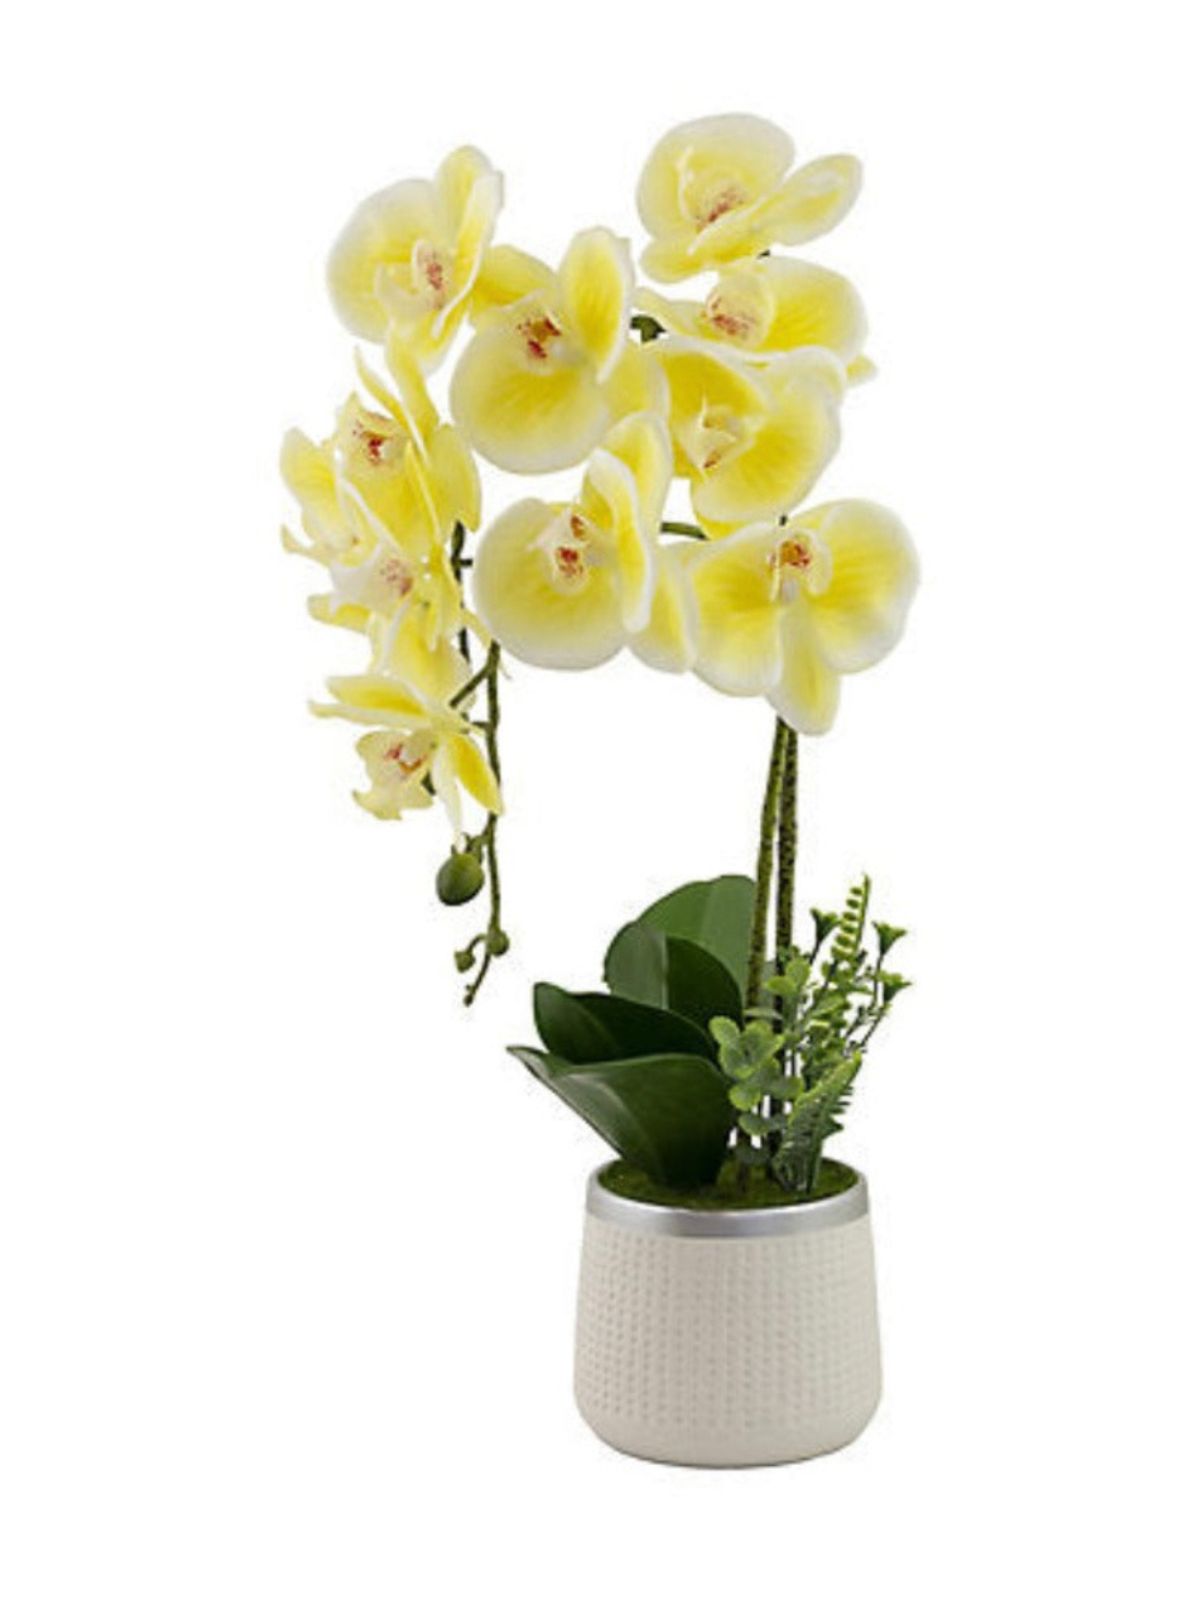 This elegant 21in Orchid in Ceramic Planter brings a realistic touch of nature to your home or office. Features vibrant, life-like curved petals, dainty buds and lush greens, all in a ceramic planter.